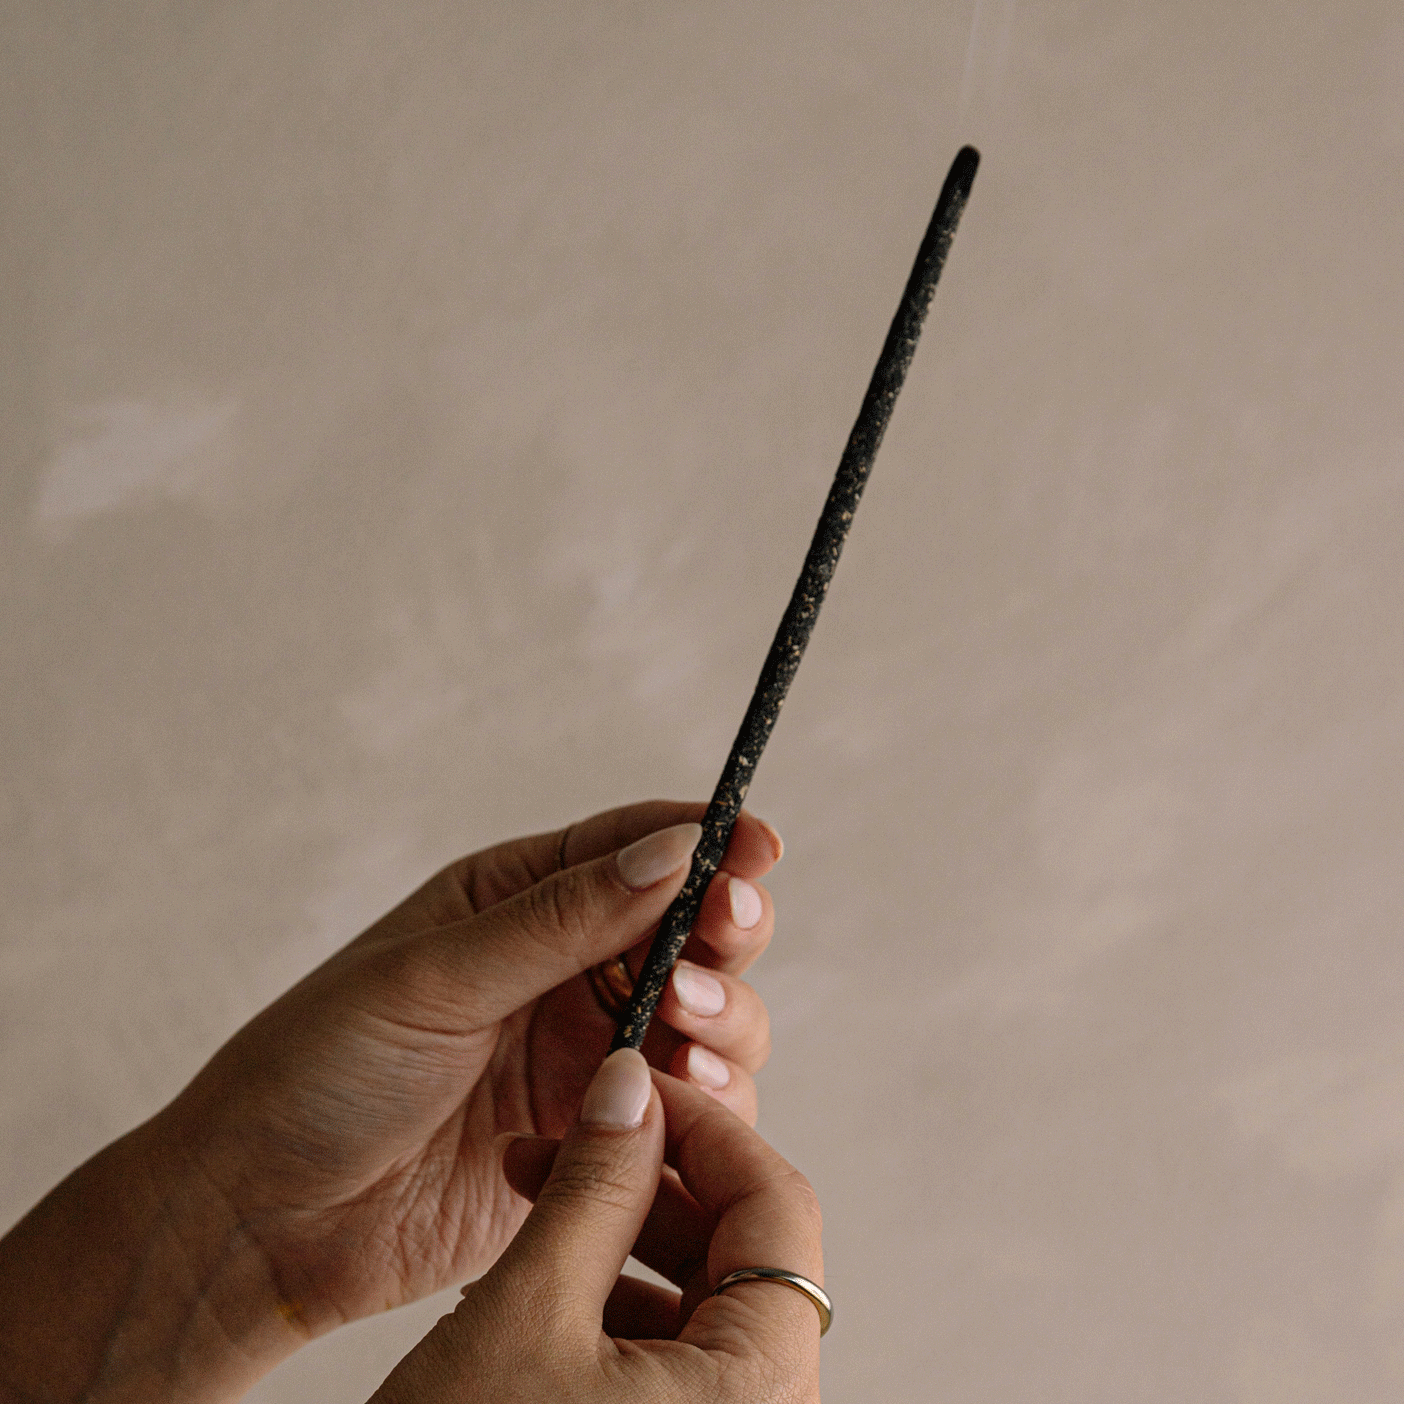 ritual of smudging copal incense stick